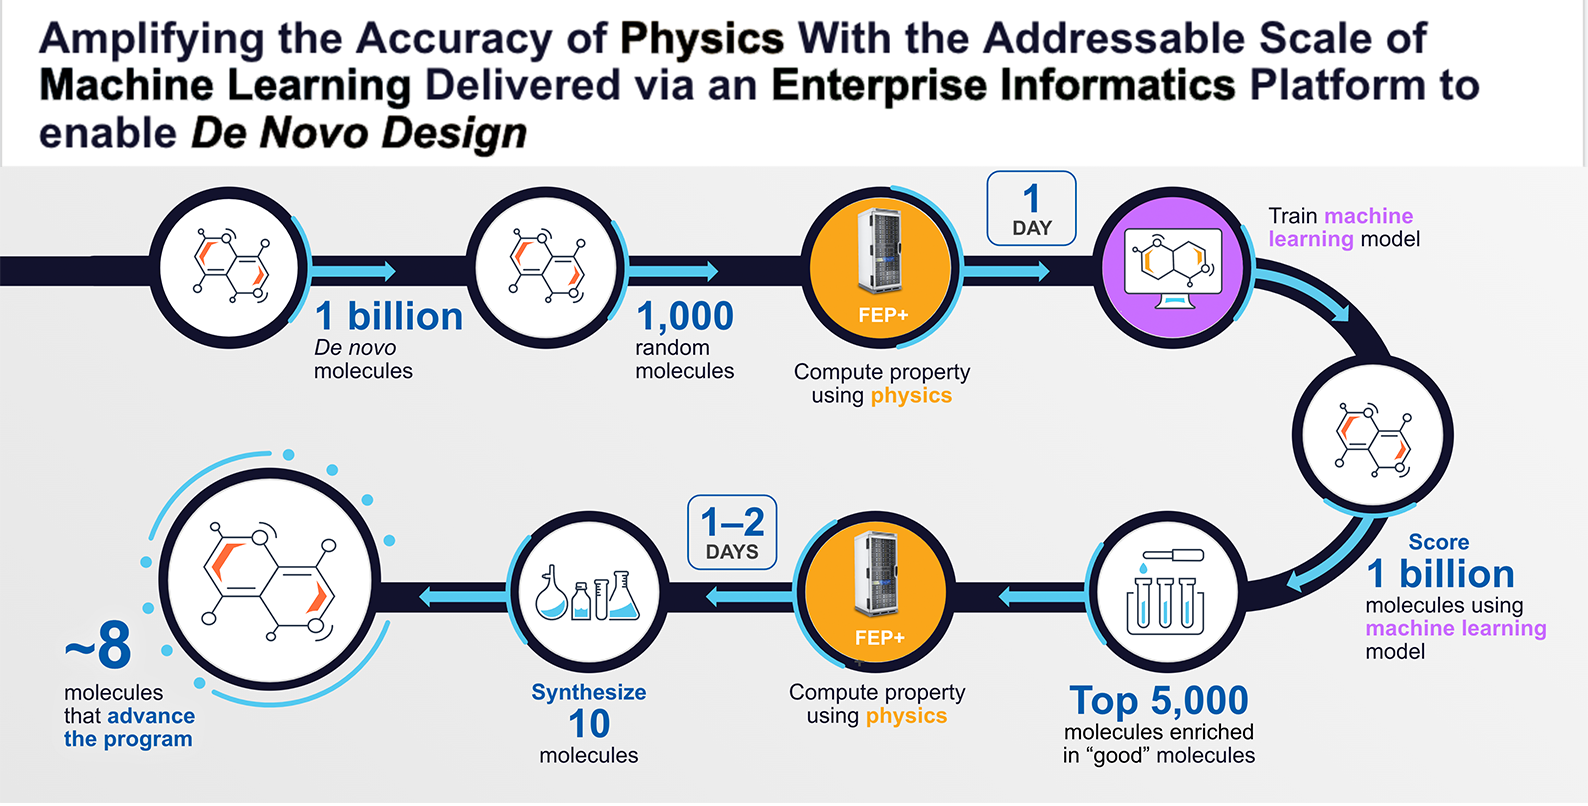 The drug discovery process is depicted, through the approach of physics, machine learning, and enterprise informatics.